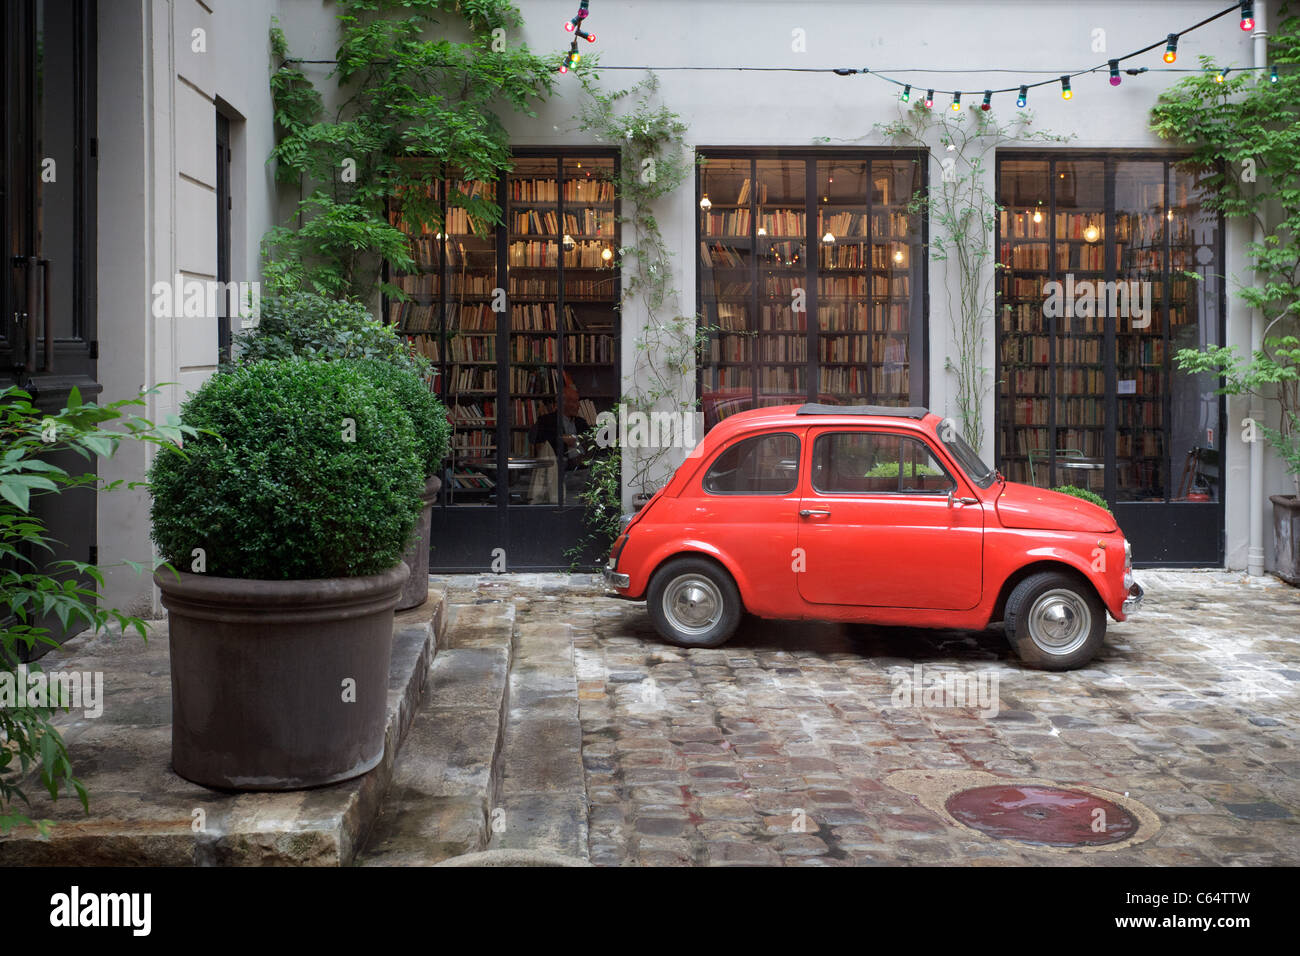 Red Fiat 500 car in courtyard outside Paris concept store, Merci Stock Photo